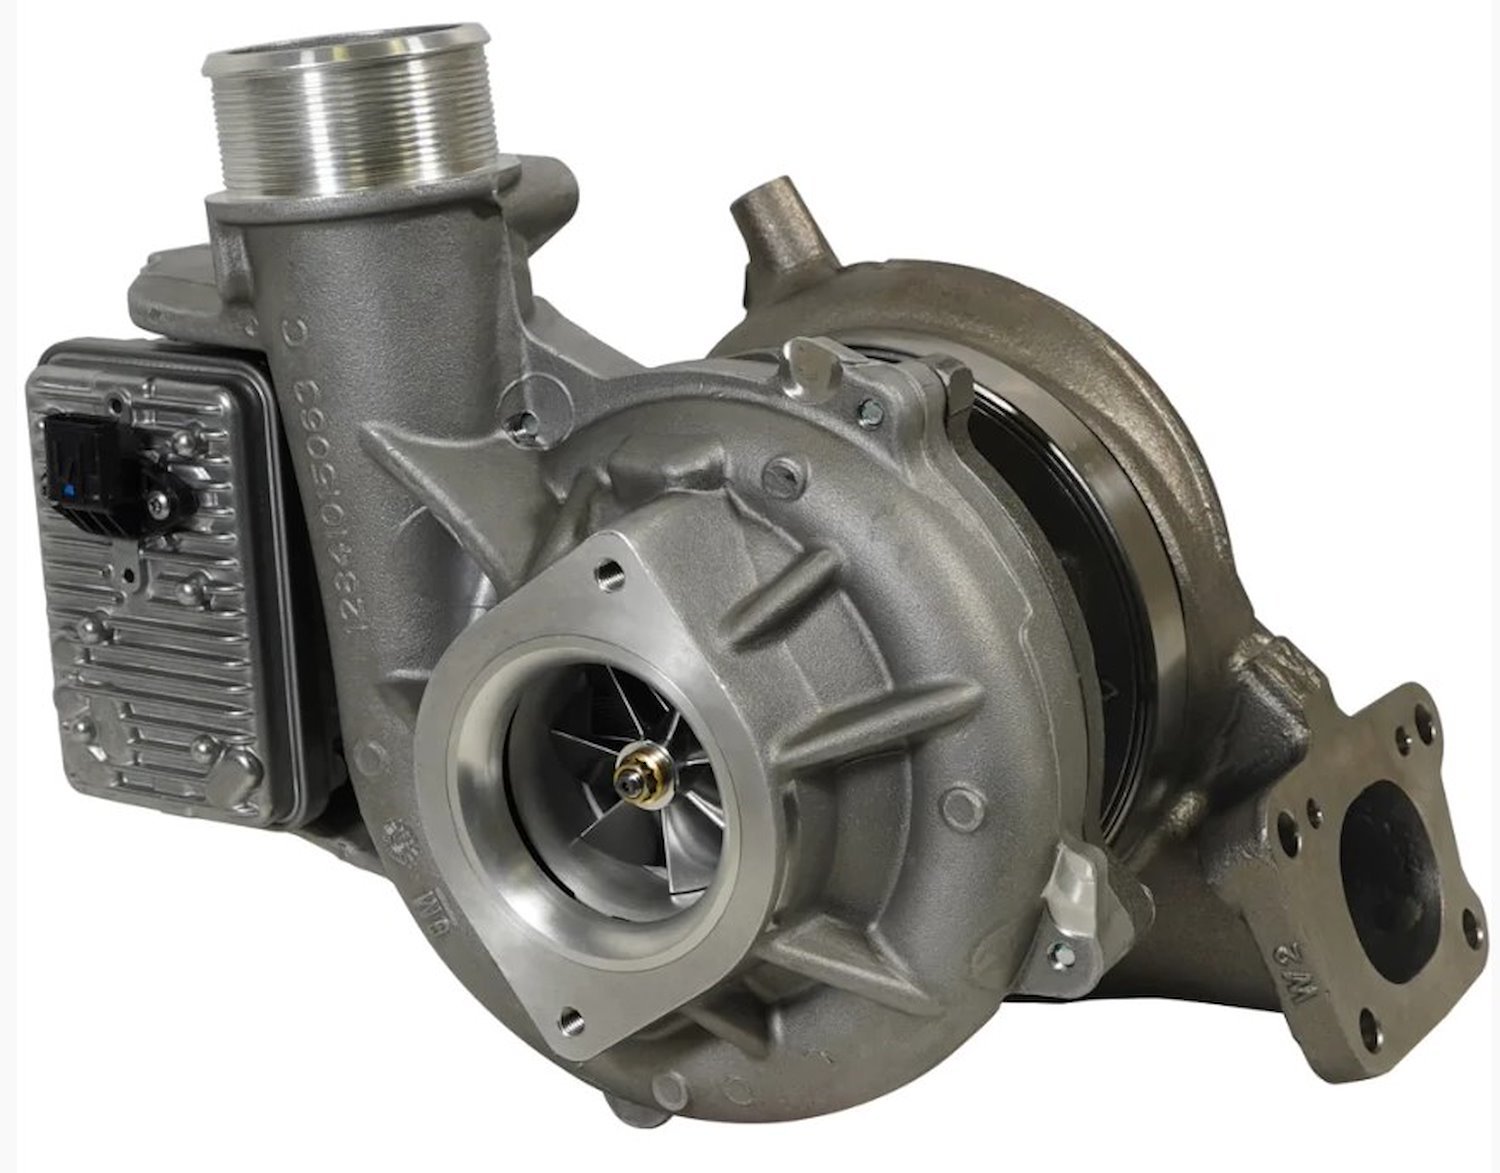 Screamer Turbocharger for Select Chevy, GMC 2500/3500 HD